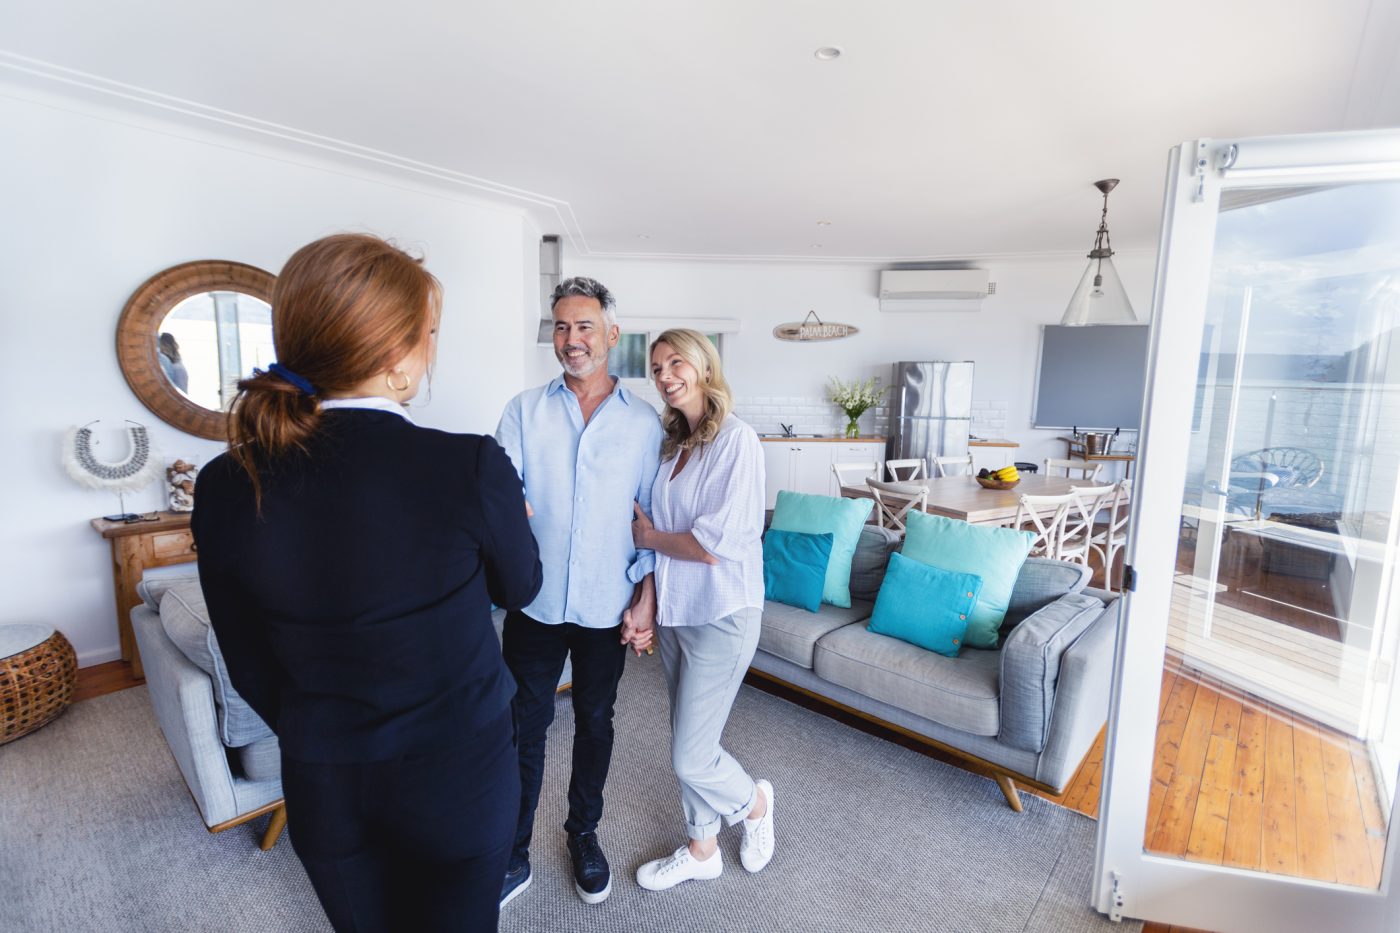 A cheerful red-headed realtor stands in a bright, beautifully updated room, engaging with a mature, delighted couple. The couple embraces as they attentively listen to the realtor, who is sharing valuable information about the housing market. This image captures the essence of concierge customer service, elevating the home buying experience.